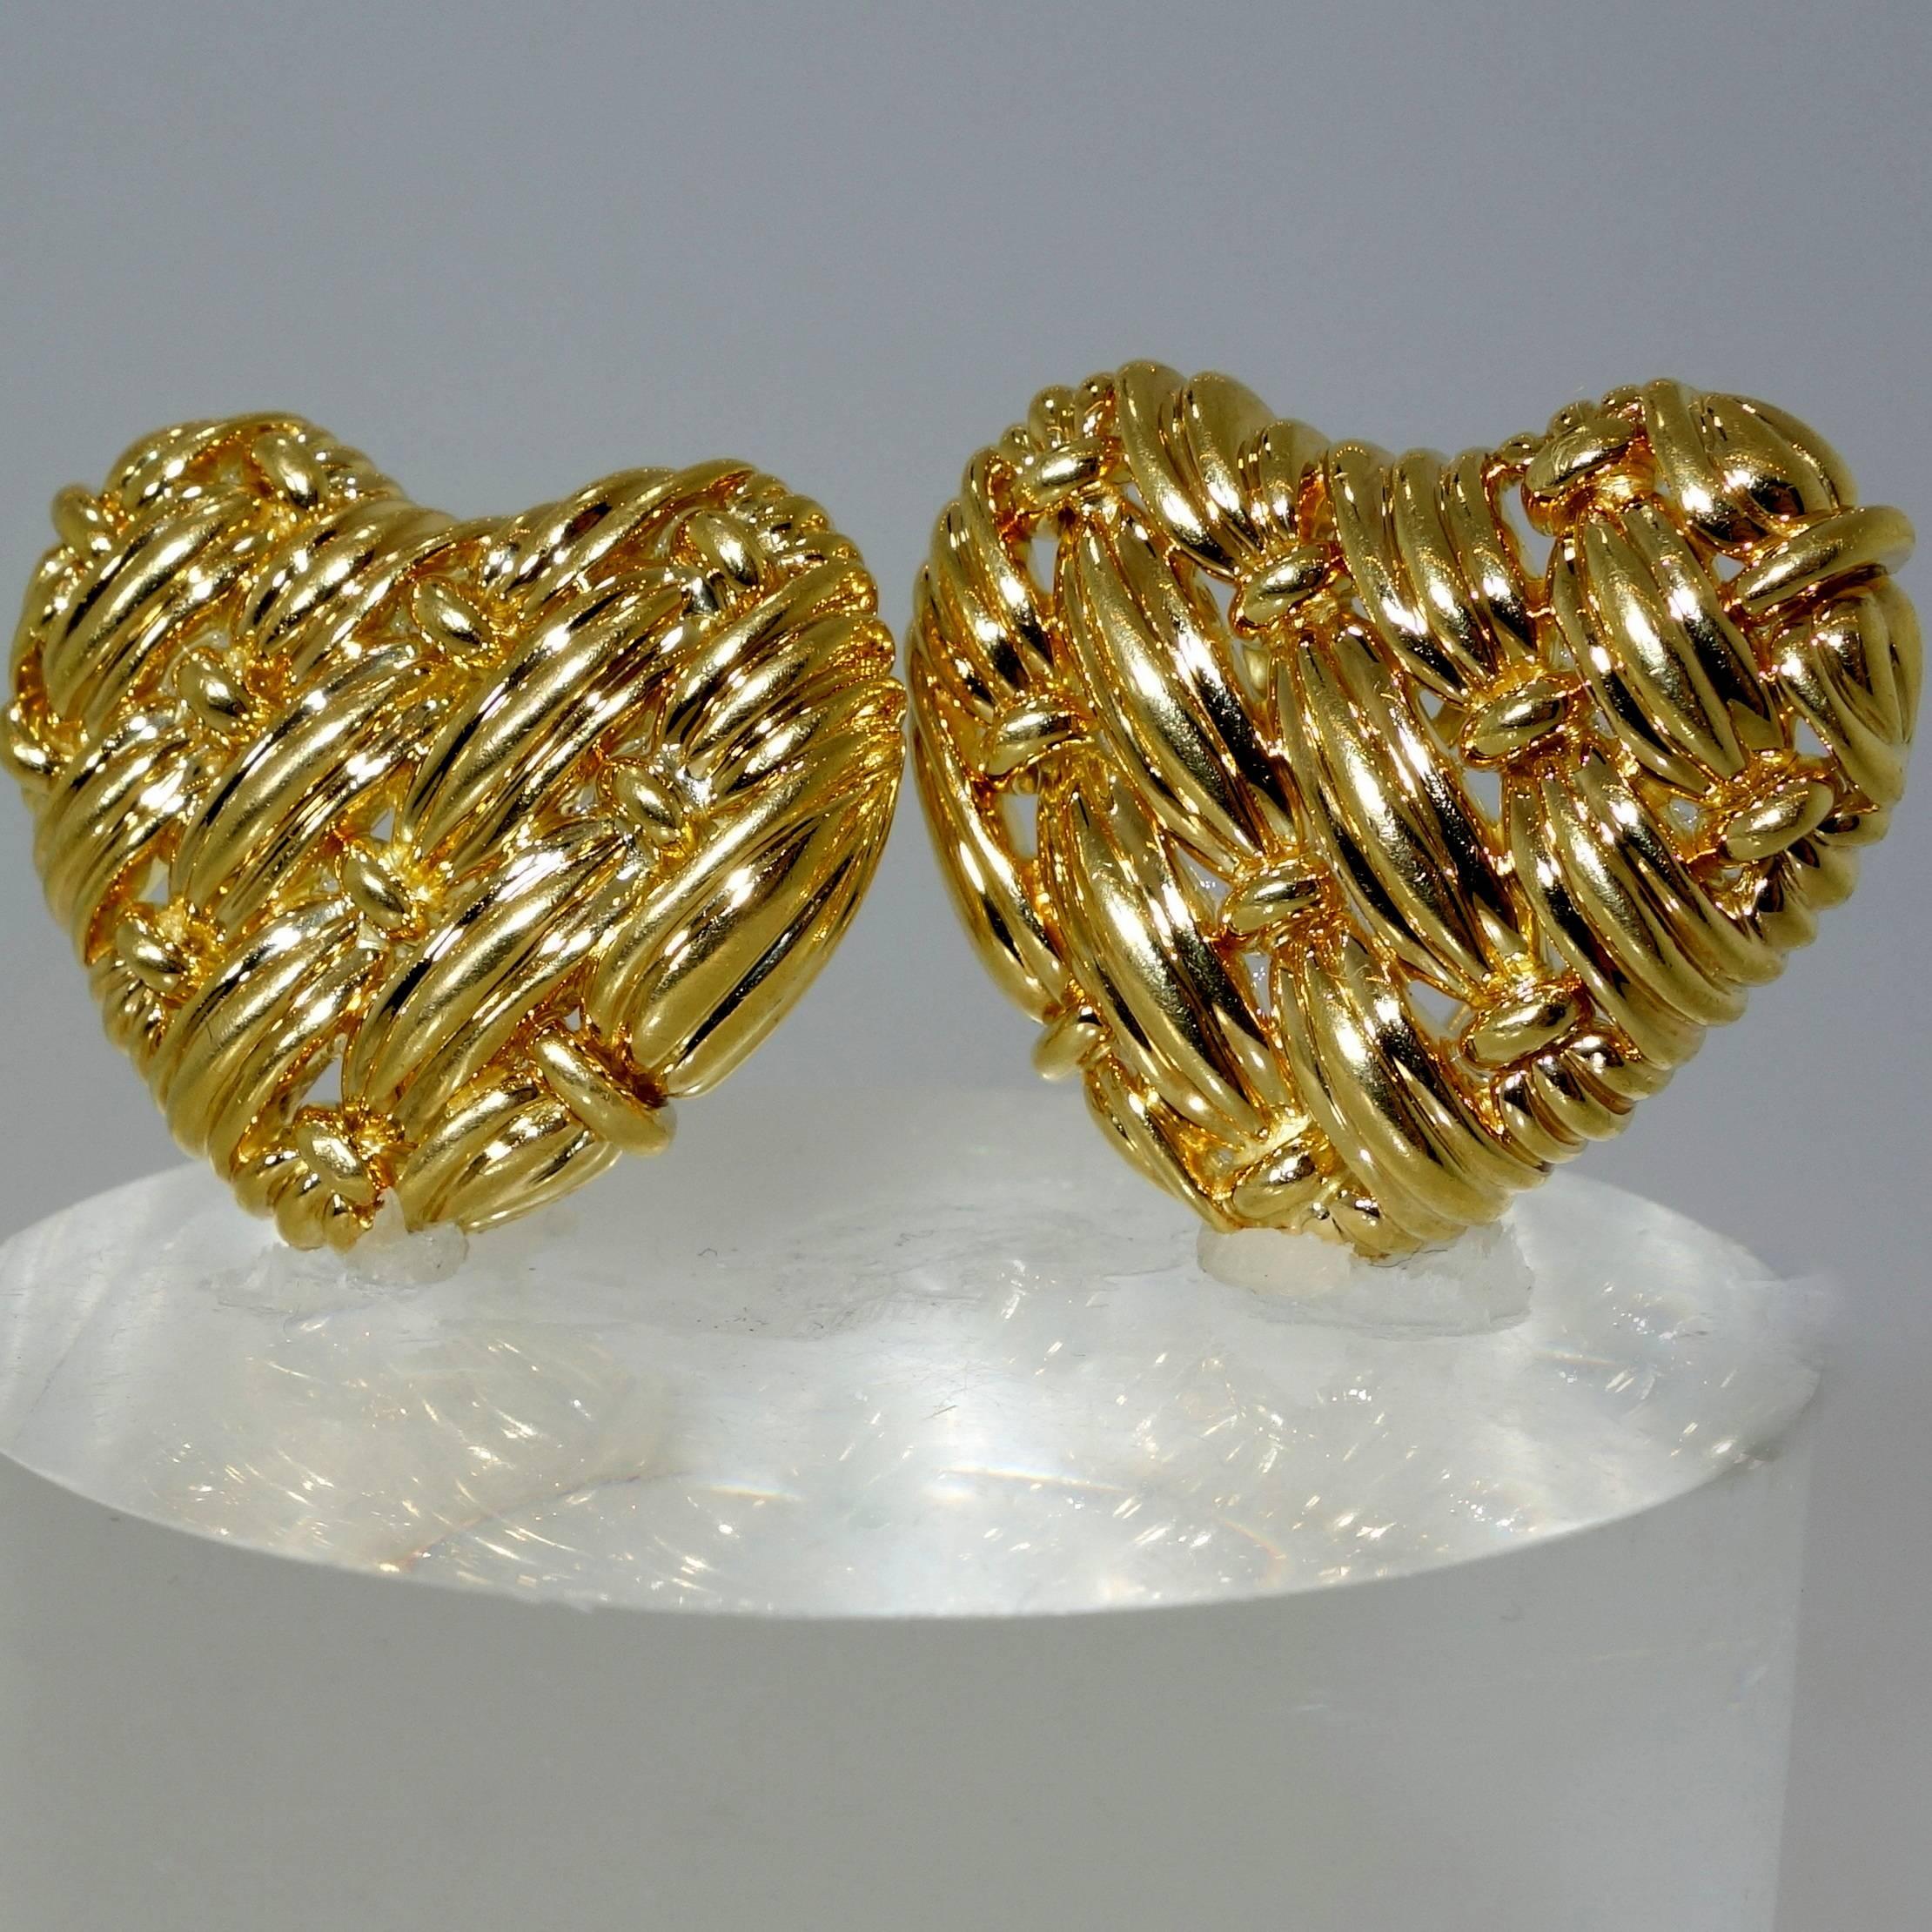 18K woven yellow gold heart motif earrings.  These substantial and well made earrings are now for a non pierce ear, however, we can easily convert them to a lever-back pierced ear for the purchaser